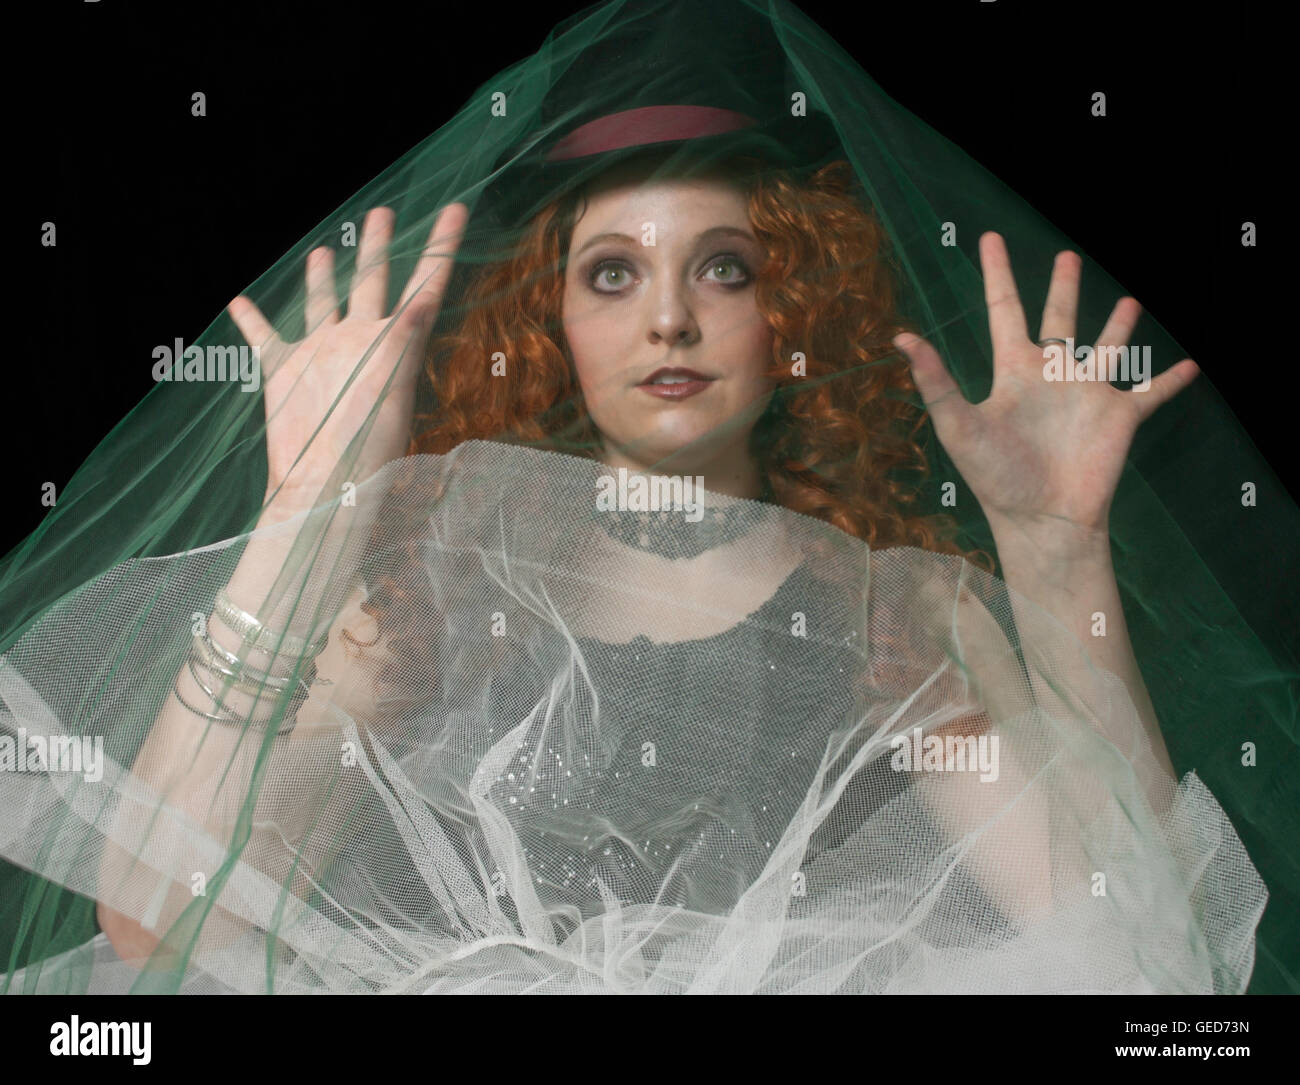 Beautiful woman with red hair wearing top hat and veil Stock Photo